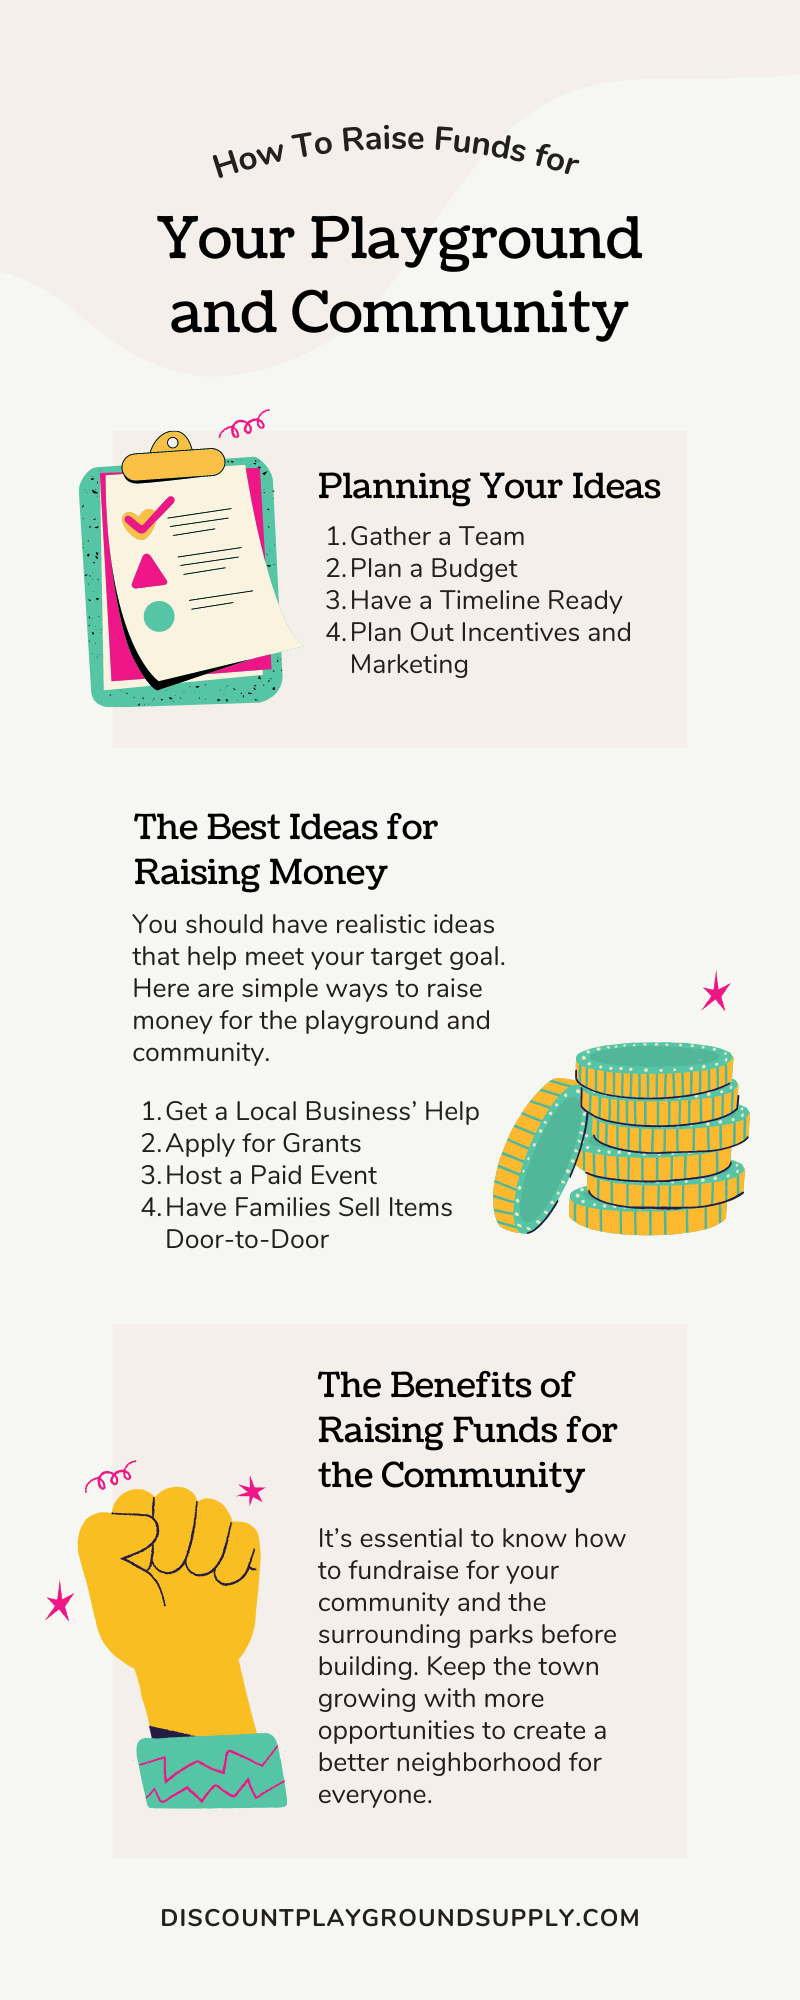 How To Raise Funds for Your Playground and Community